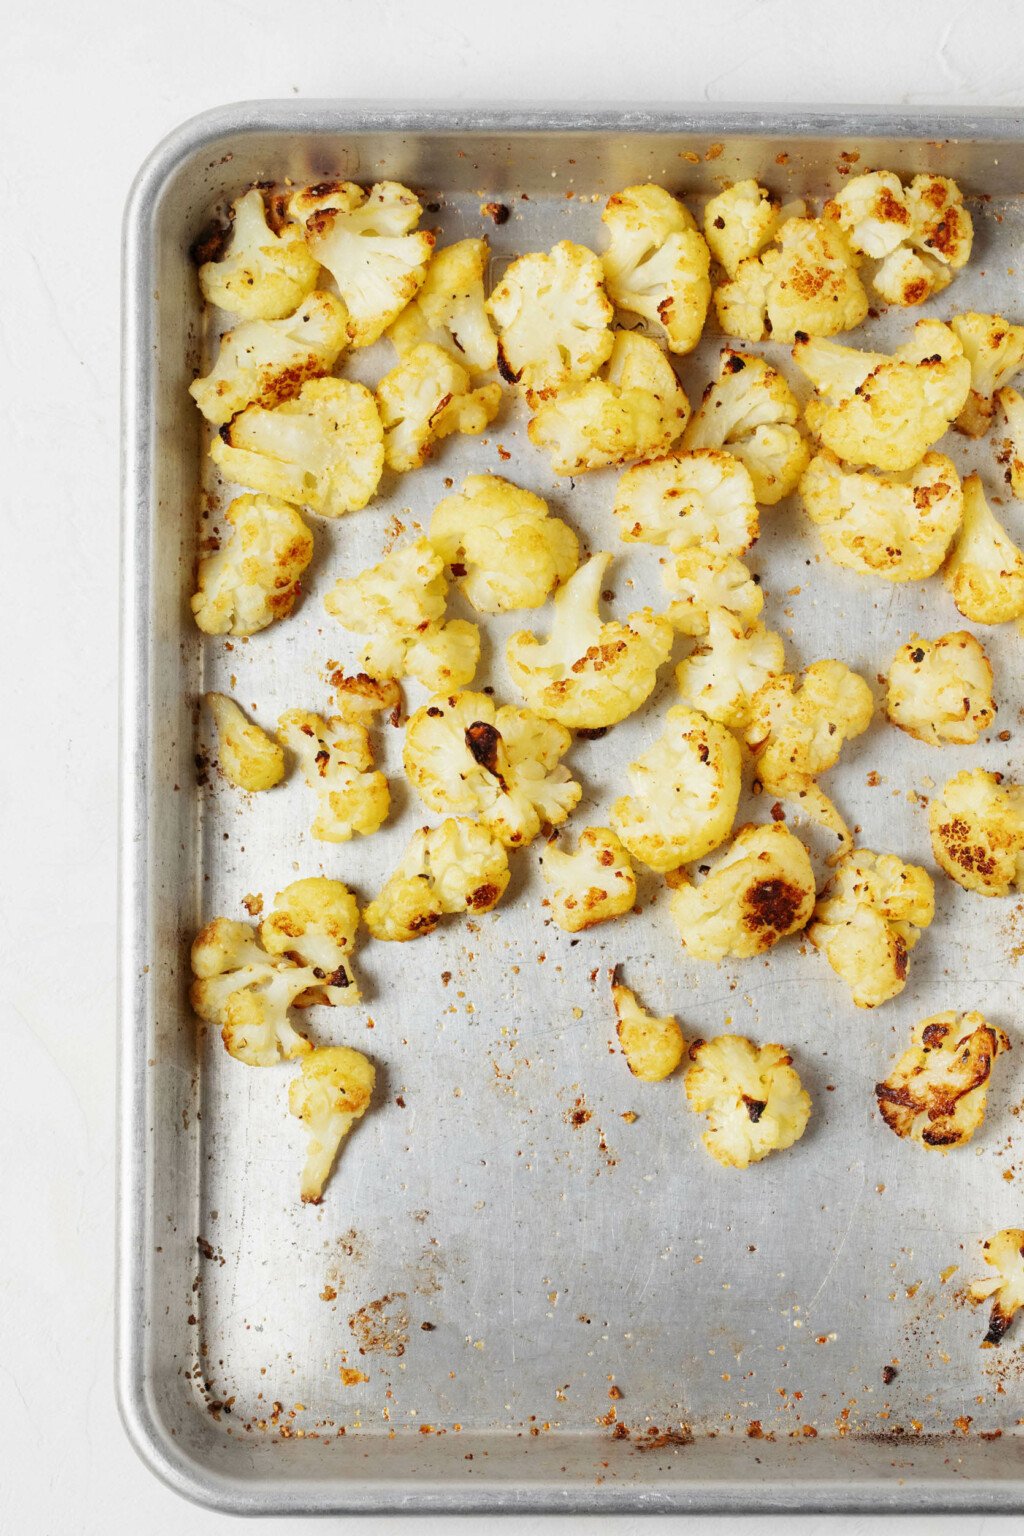 An overhead image of a silver colored oven baking sheet, which is topped with roasted cauliflower.